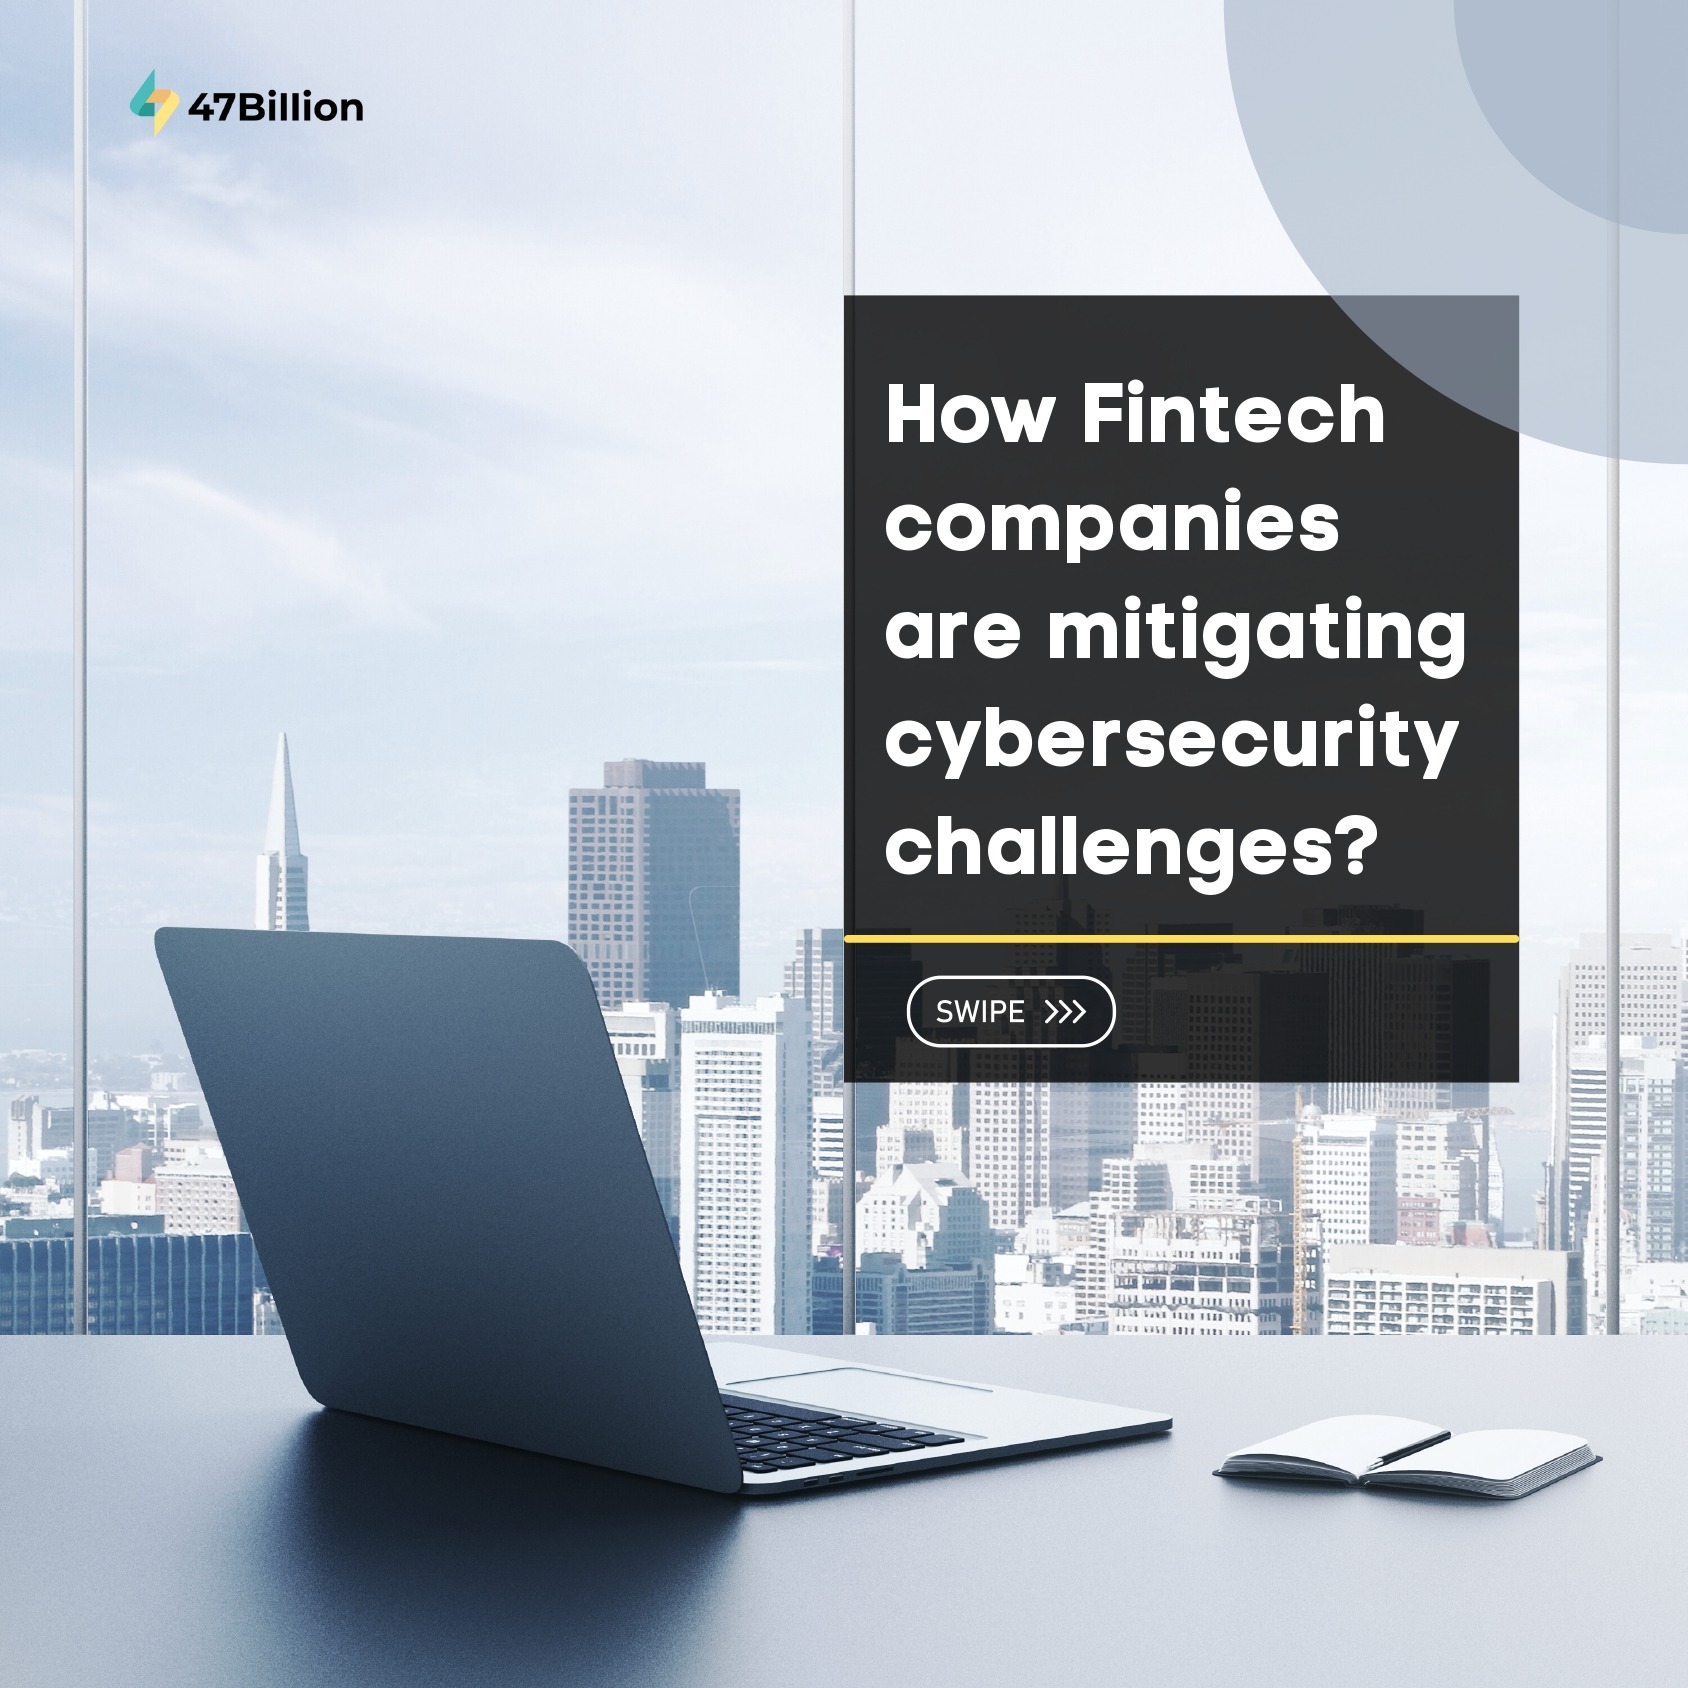 How fintech companies are mitigating cybersecurity challenges